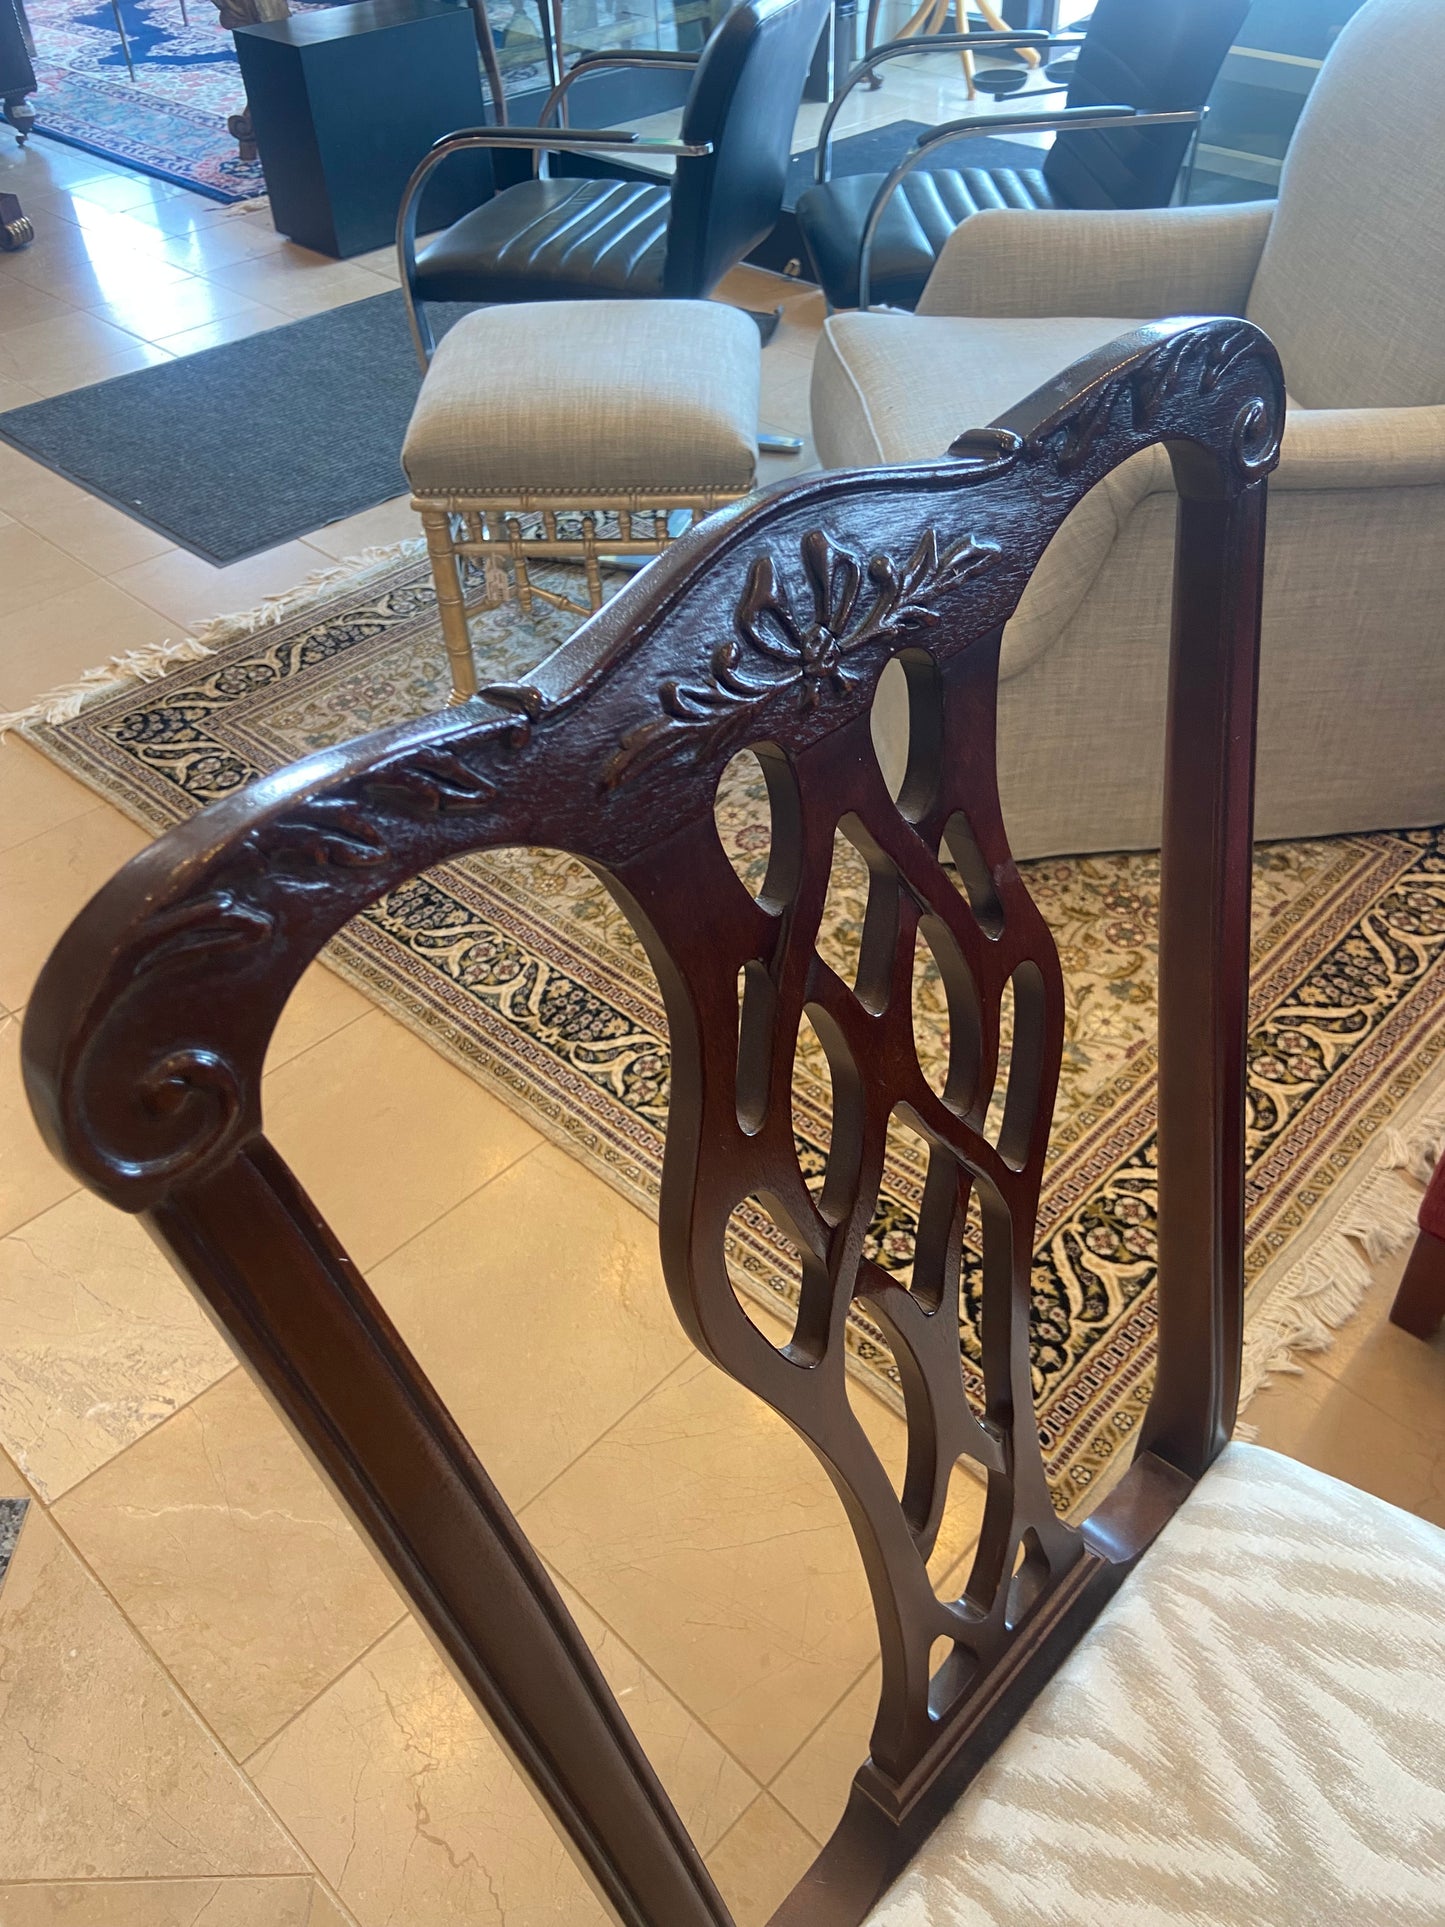 Chippendale Dining Chairs (Set of 8)